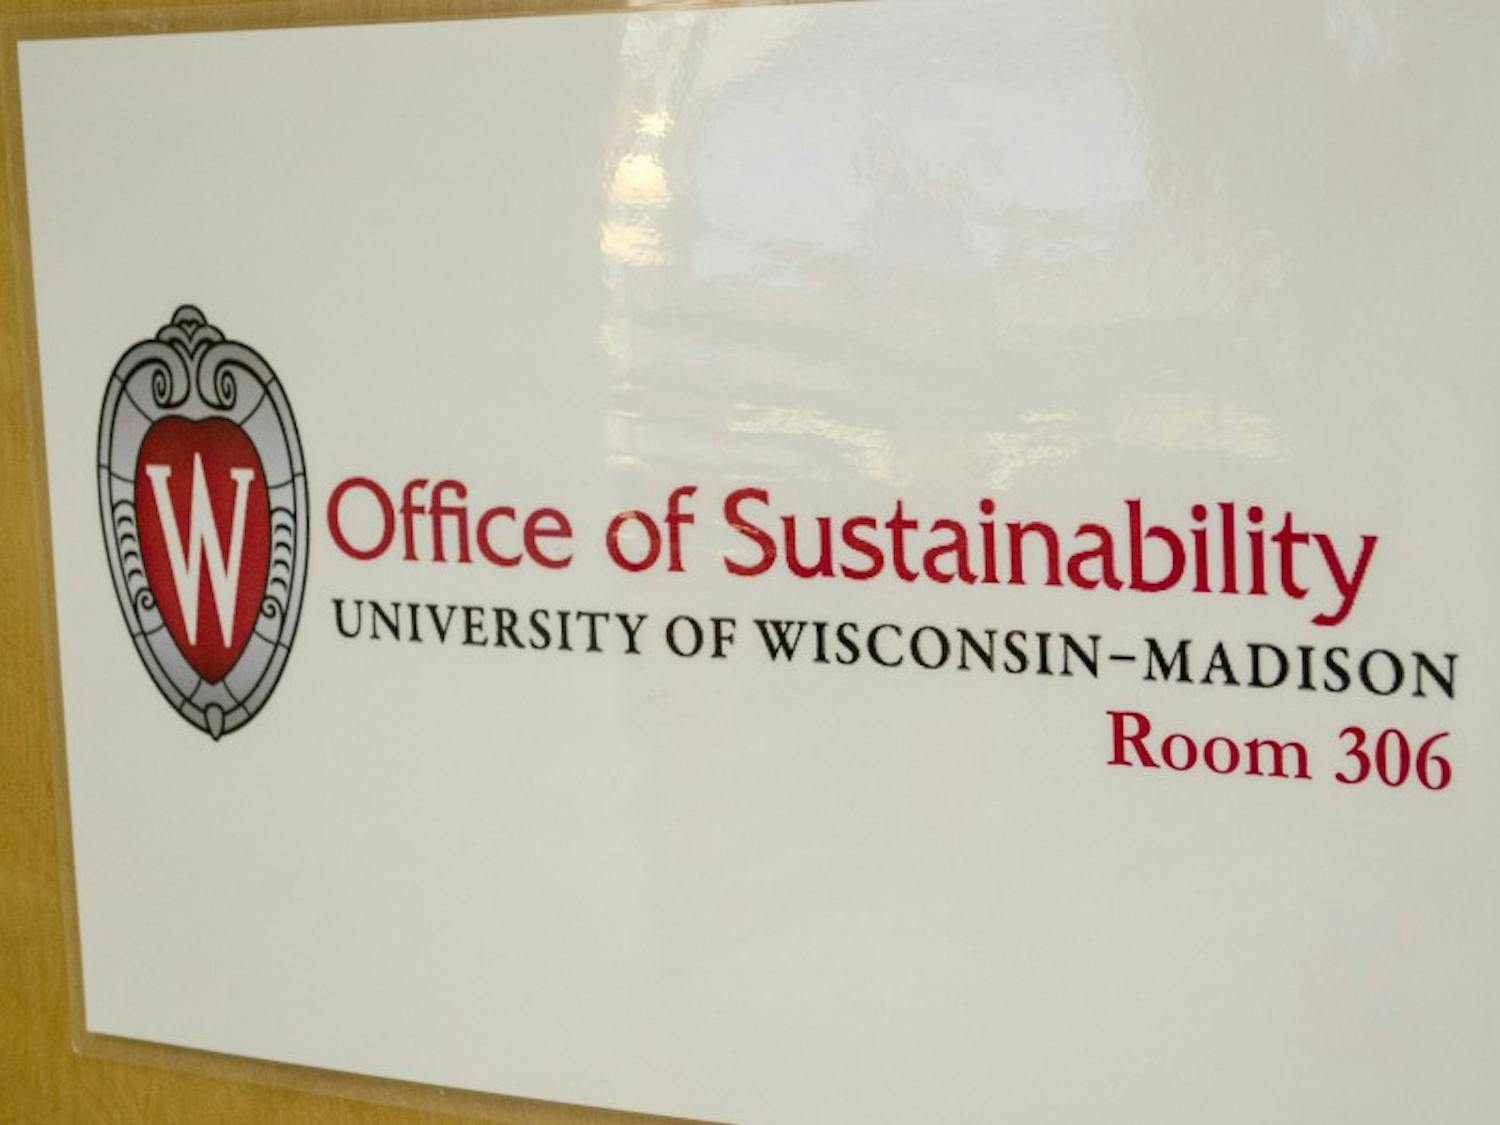 Since the founding of the Office of Sustainability in 2012, UW-Madison has made great strides in efforts to make campus more environmentally friendly. However, there are still problems around waste and food management that need to be addressed.&nbsp;